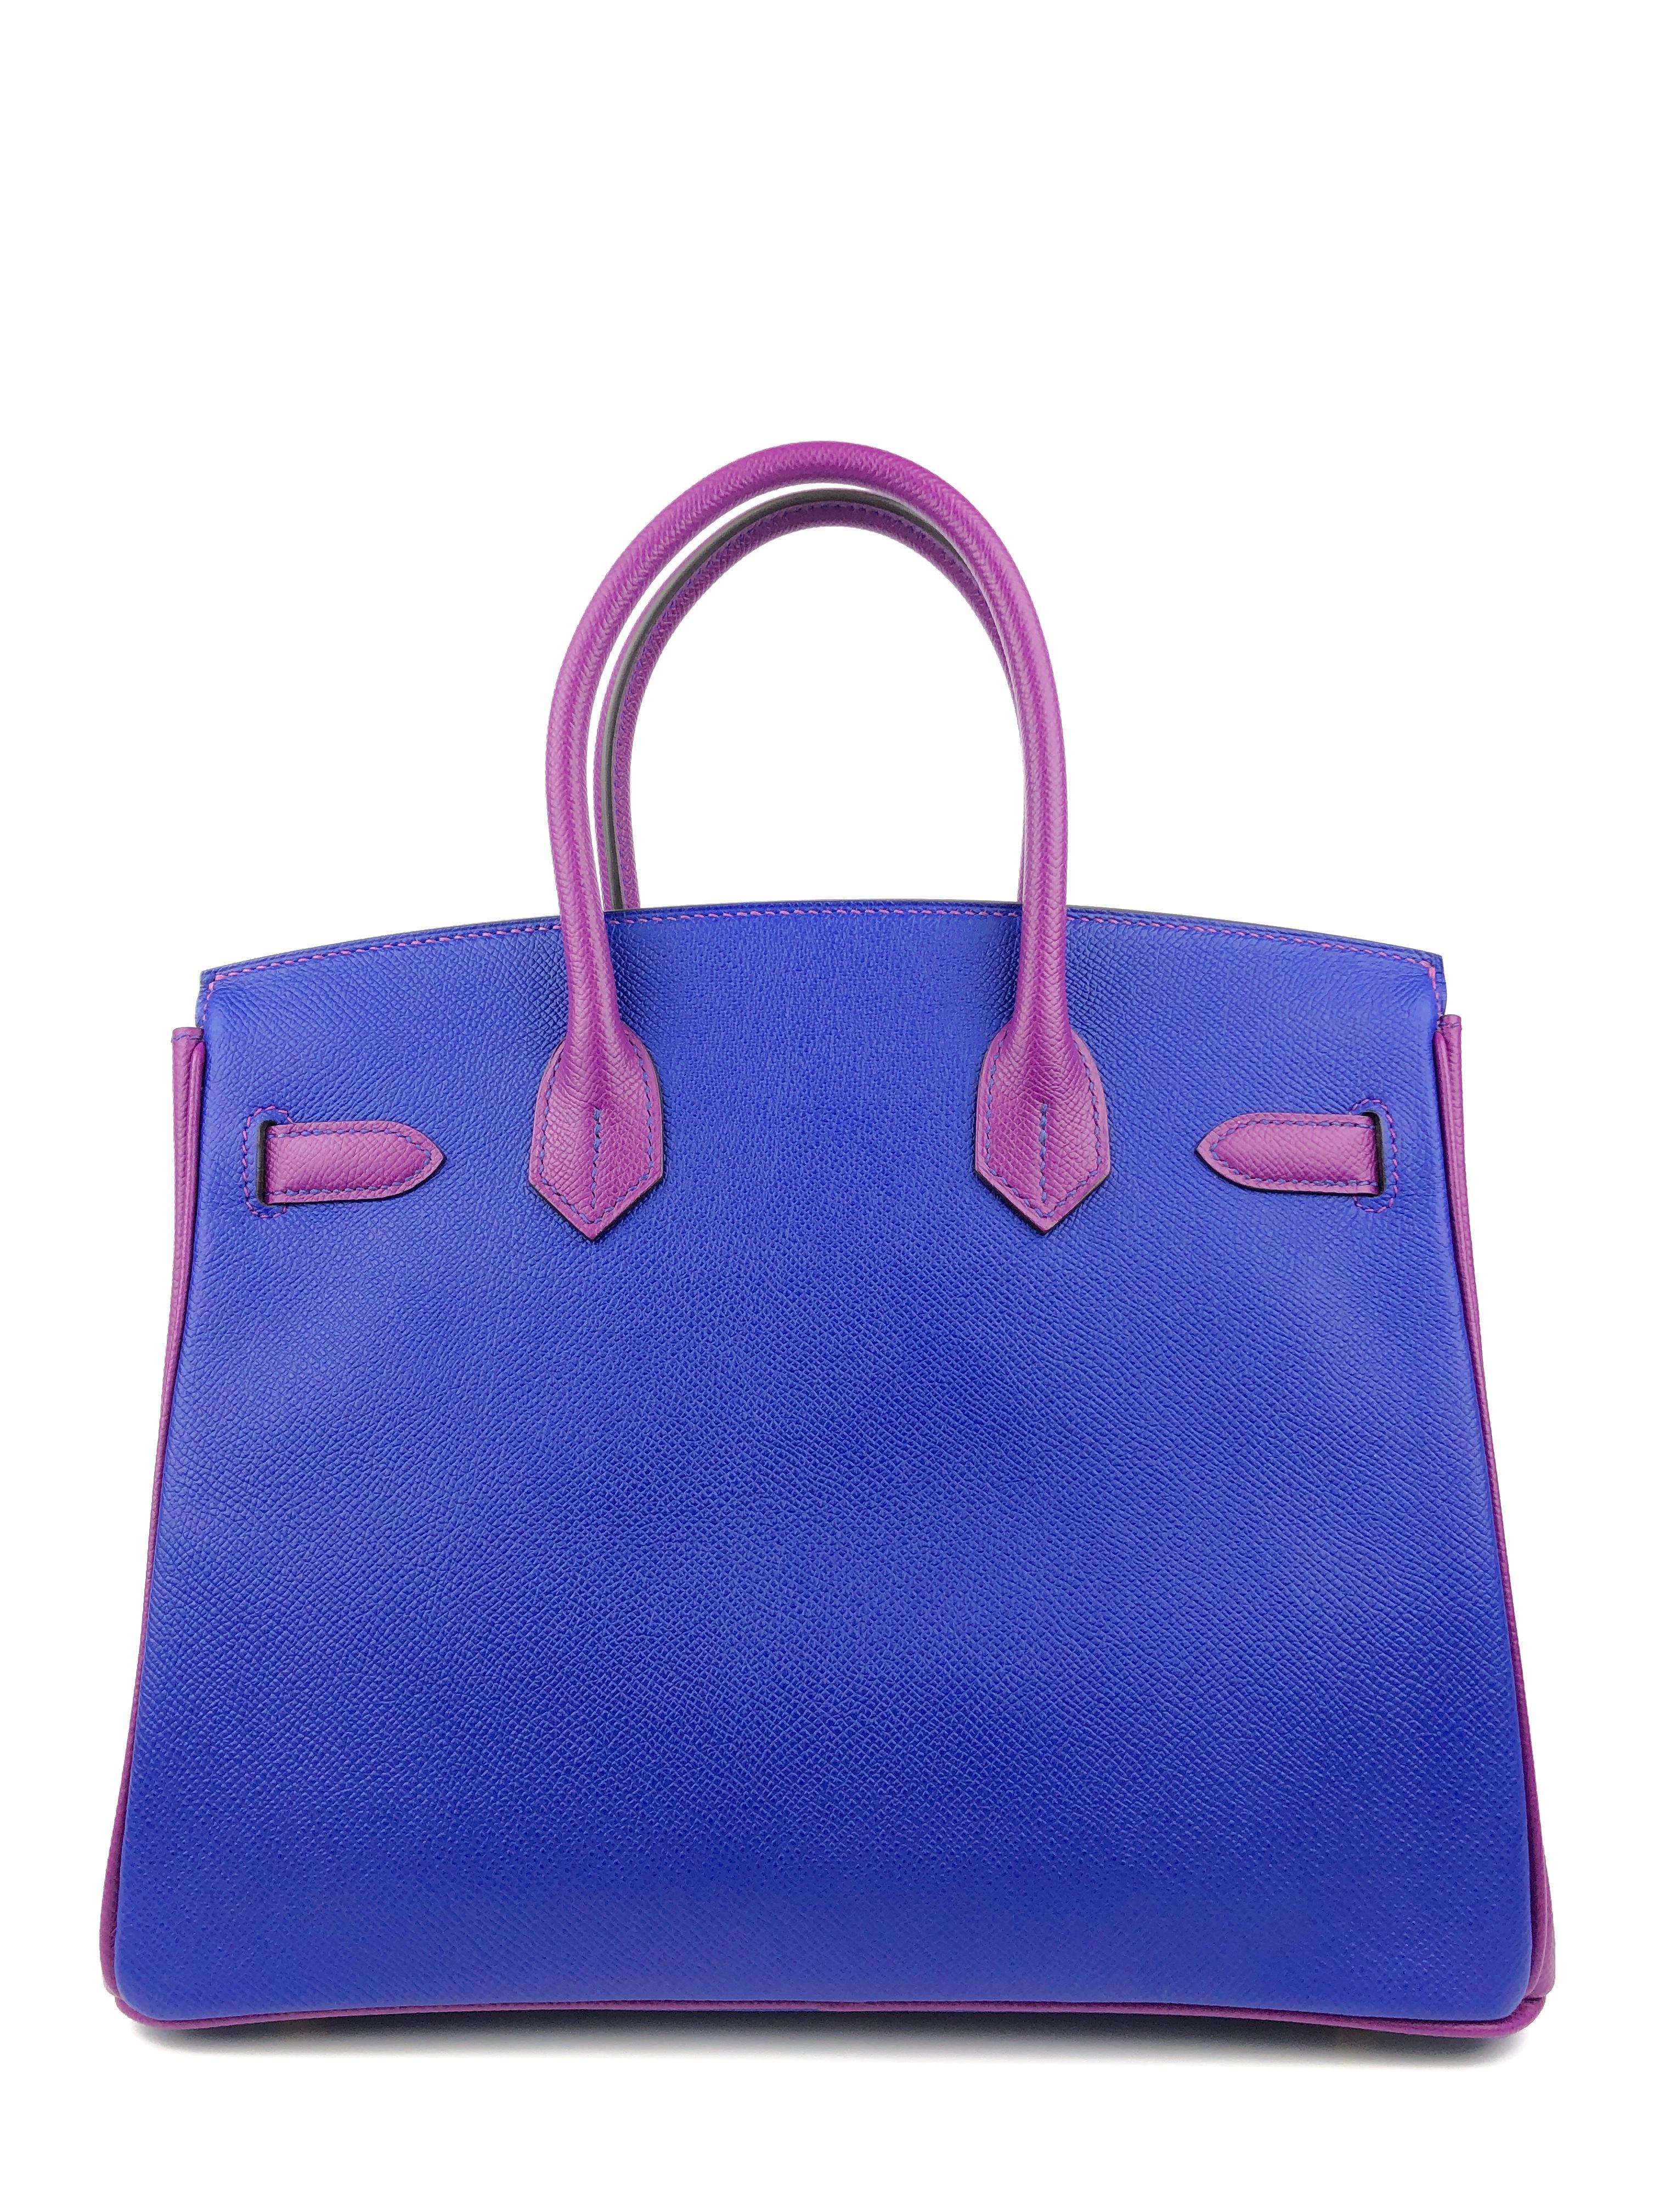 This authentic Hermès Intense Blue and Purple Epsom 30 cm Horseshoe Birkin is in pristine unworn condition; the protective plastic is still intact on the hardware.    Considered the ultimate luxury item, the Hermès Birkin is stitched by hand.   The